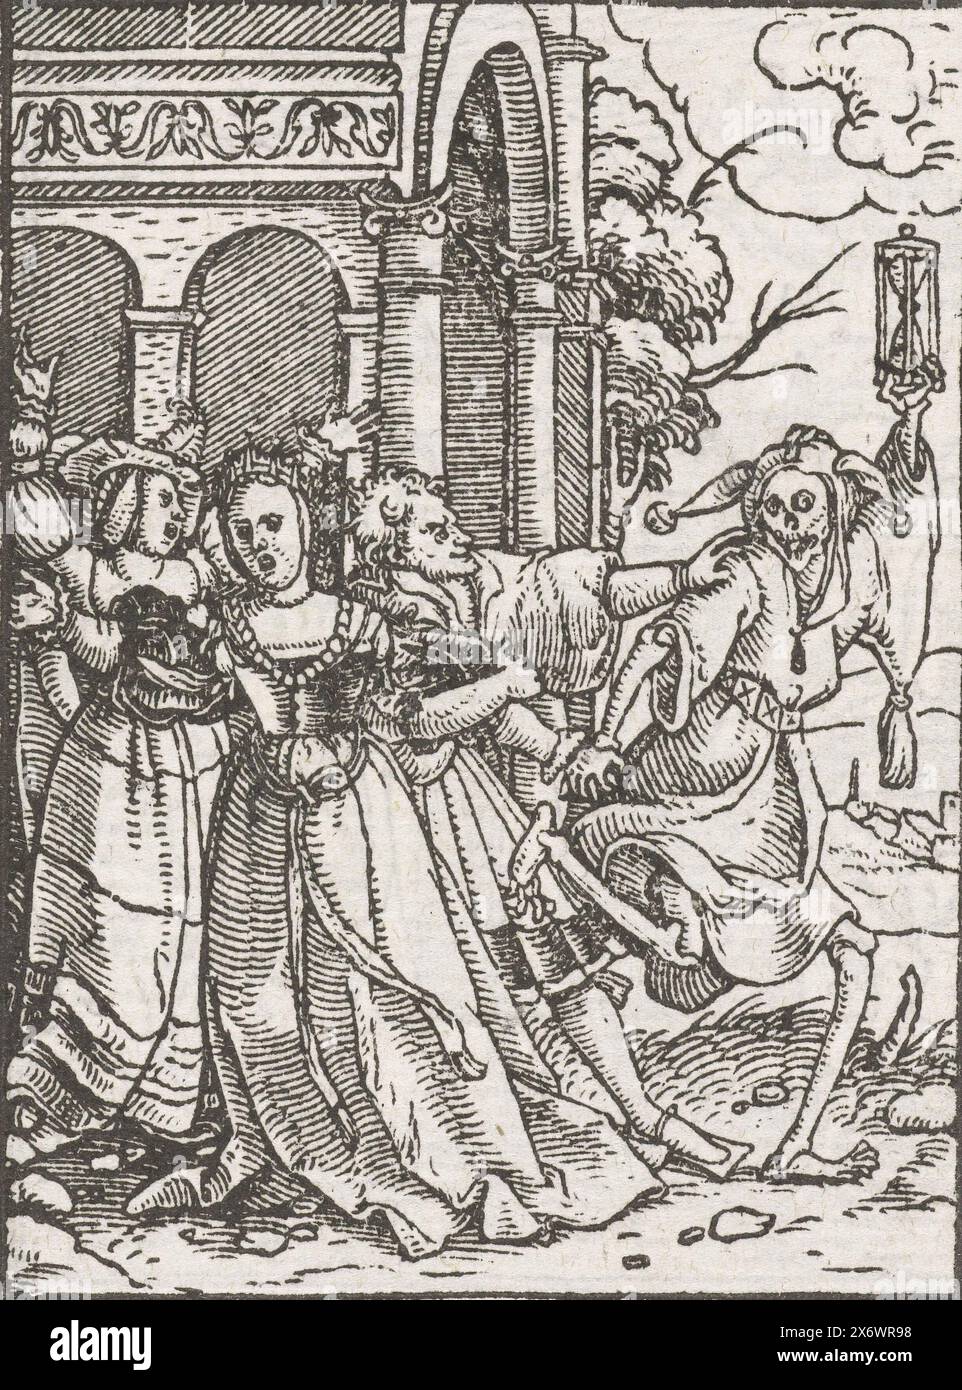 Queen and Death as a jester, Dance of Death (series title), Death, dancing and dressed as a jester with an hourglass in his skeleton hand, is kept away from the queen by court servants. In the margin above the print is the text Isaie XXXII Stock Photo